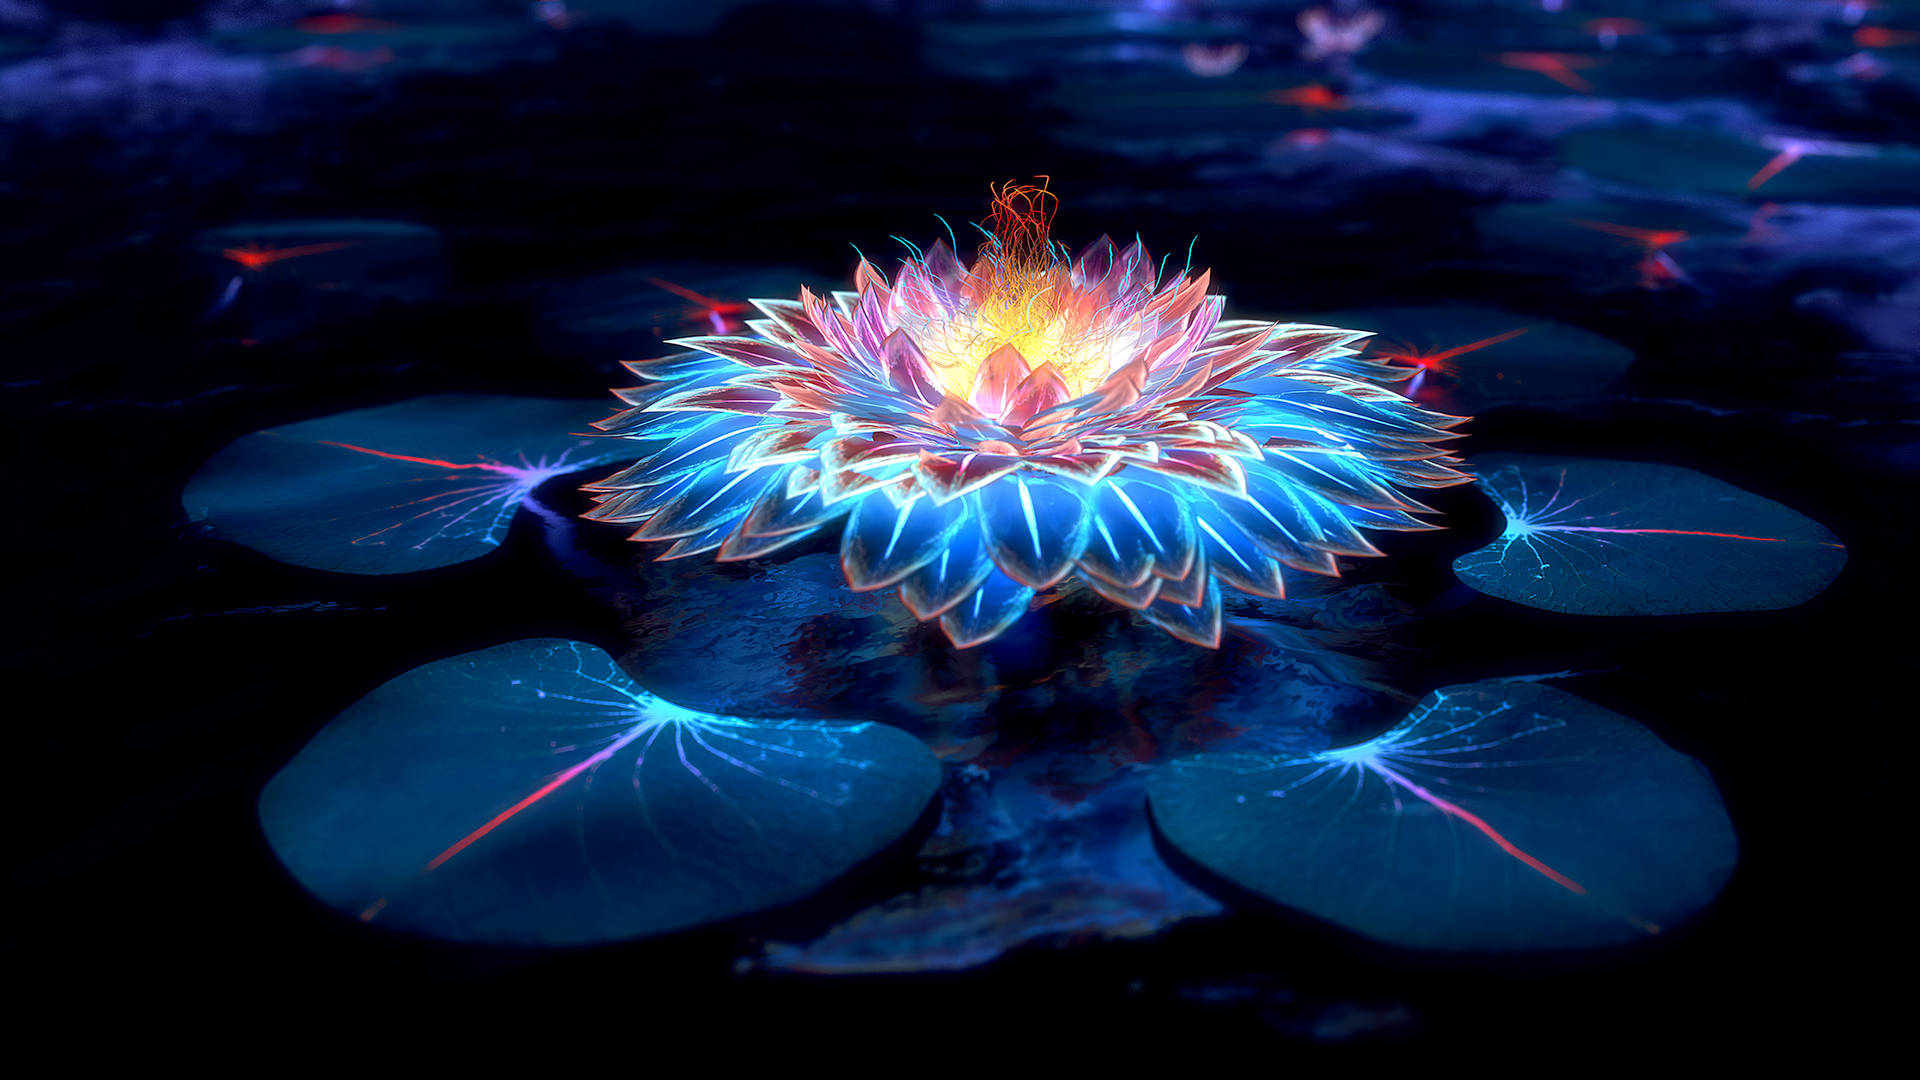 Lotus And Lights In The Dark Wallpaper